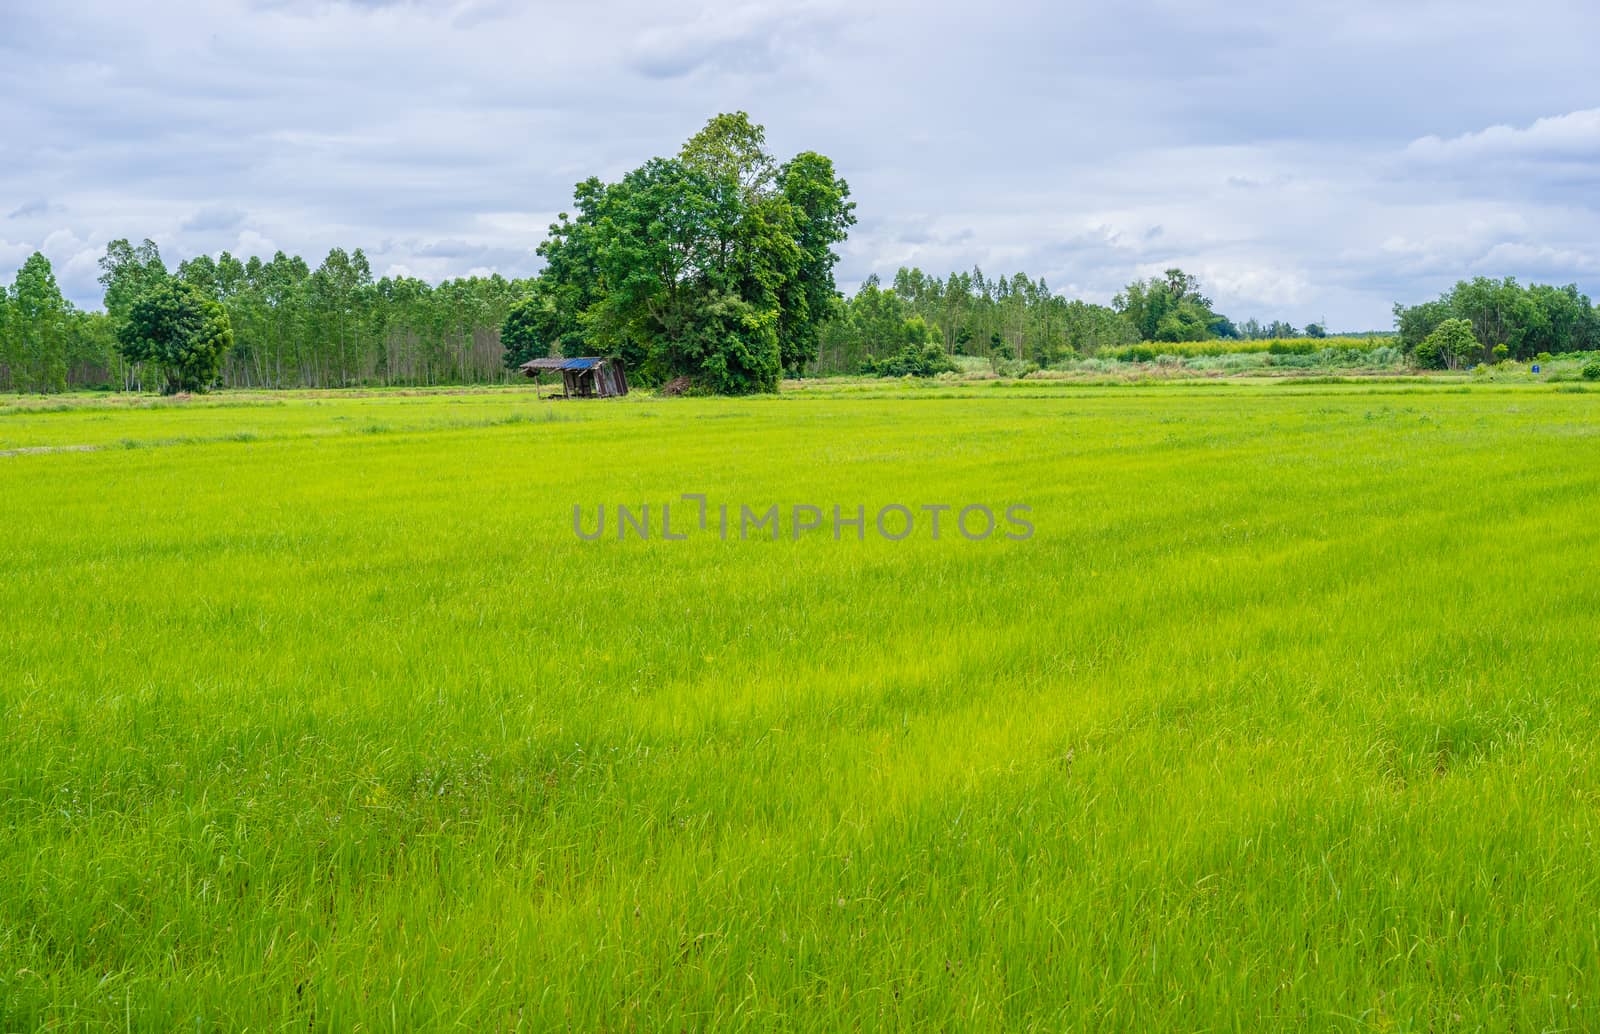 Hut and tree in rice green field in countryside by domonite